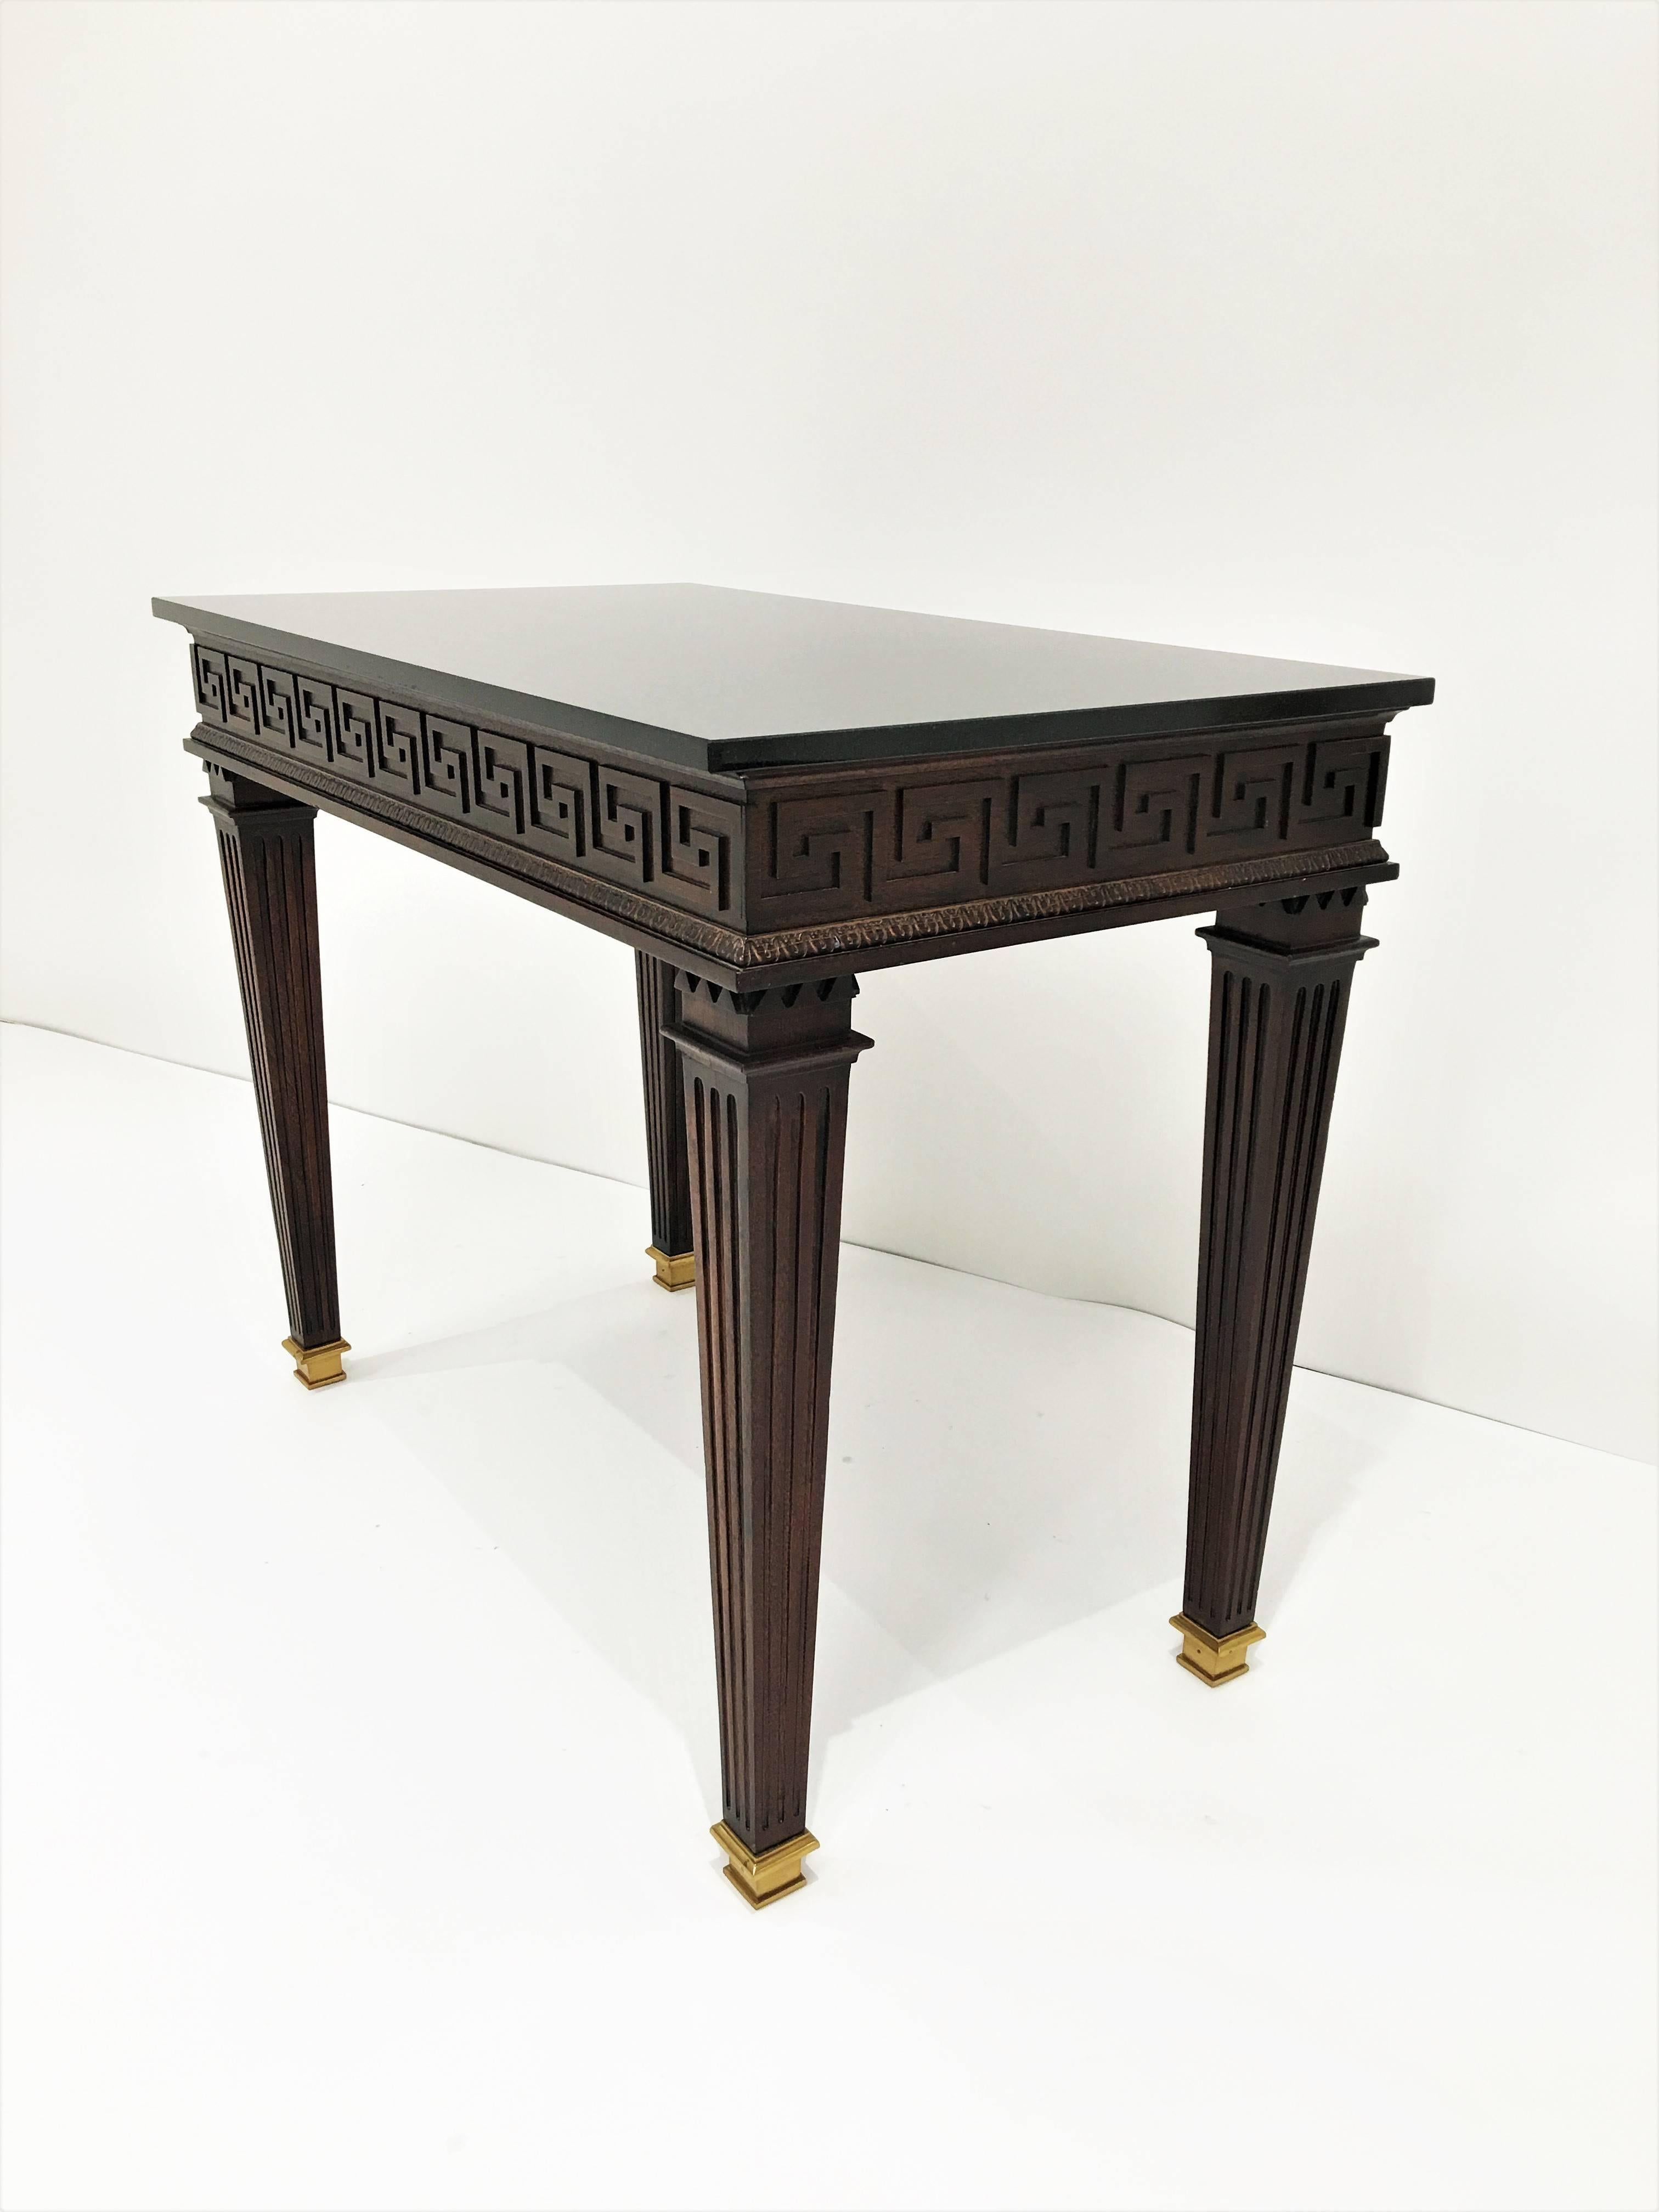 Neoclassical, circa 1920s. Elegant console table with newer black granite top over a narrow frieze decorated with brass Greek key pattern, supported by four fluted legs ending in brass caps.